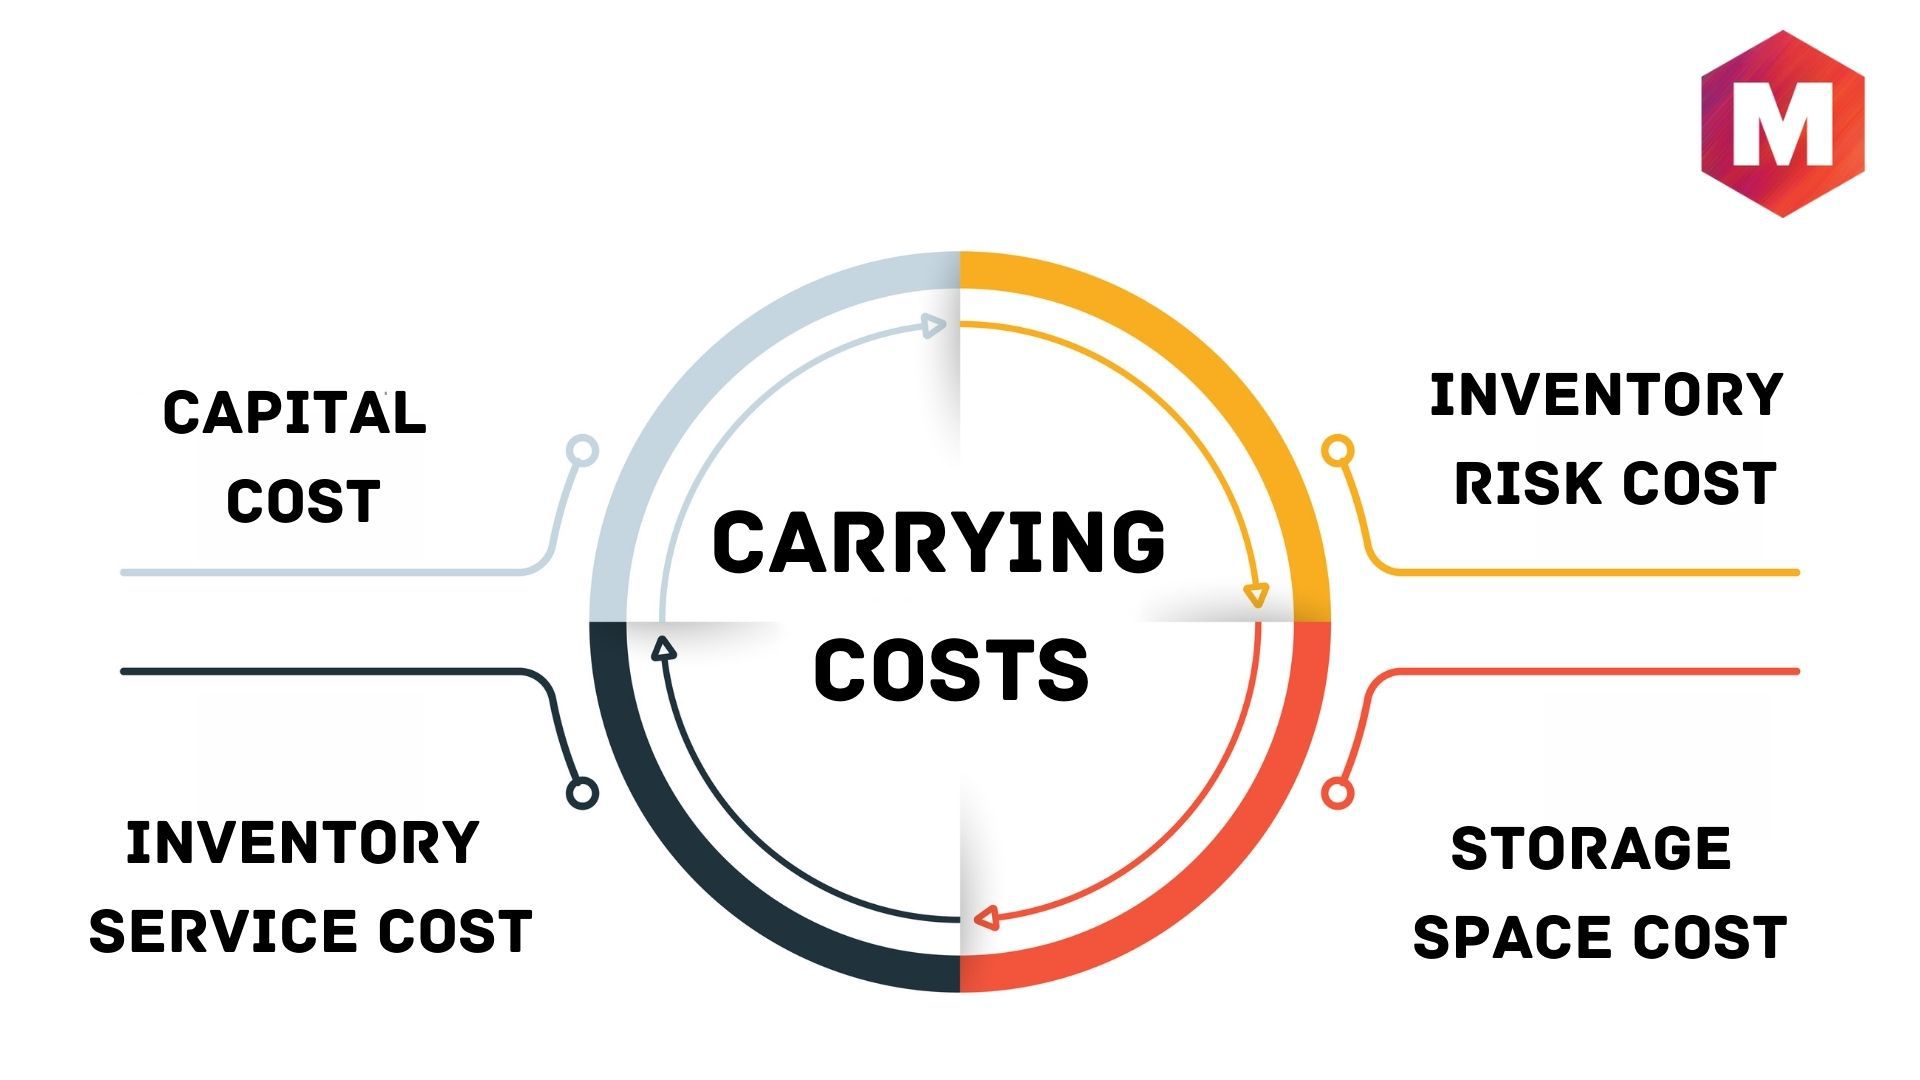 Components of Carrying Costs